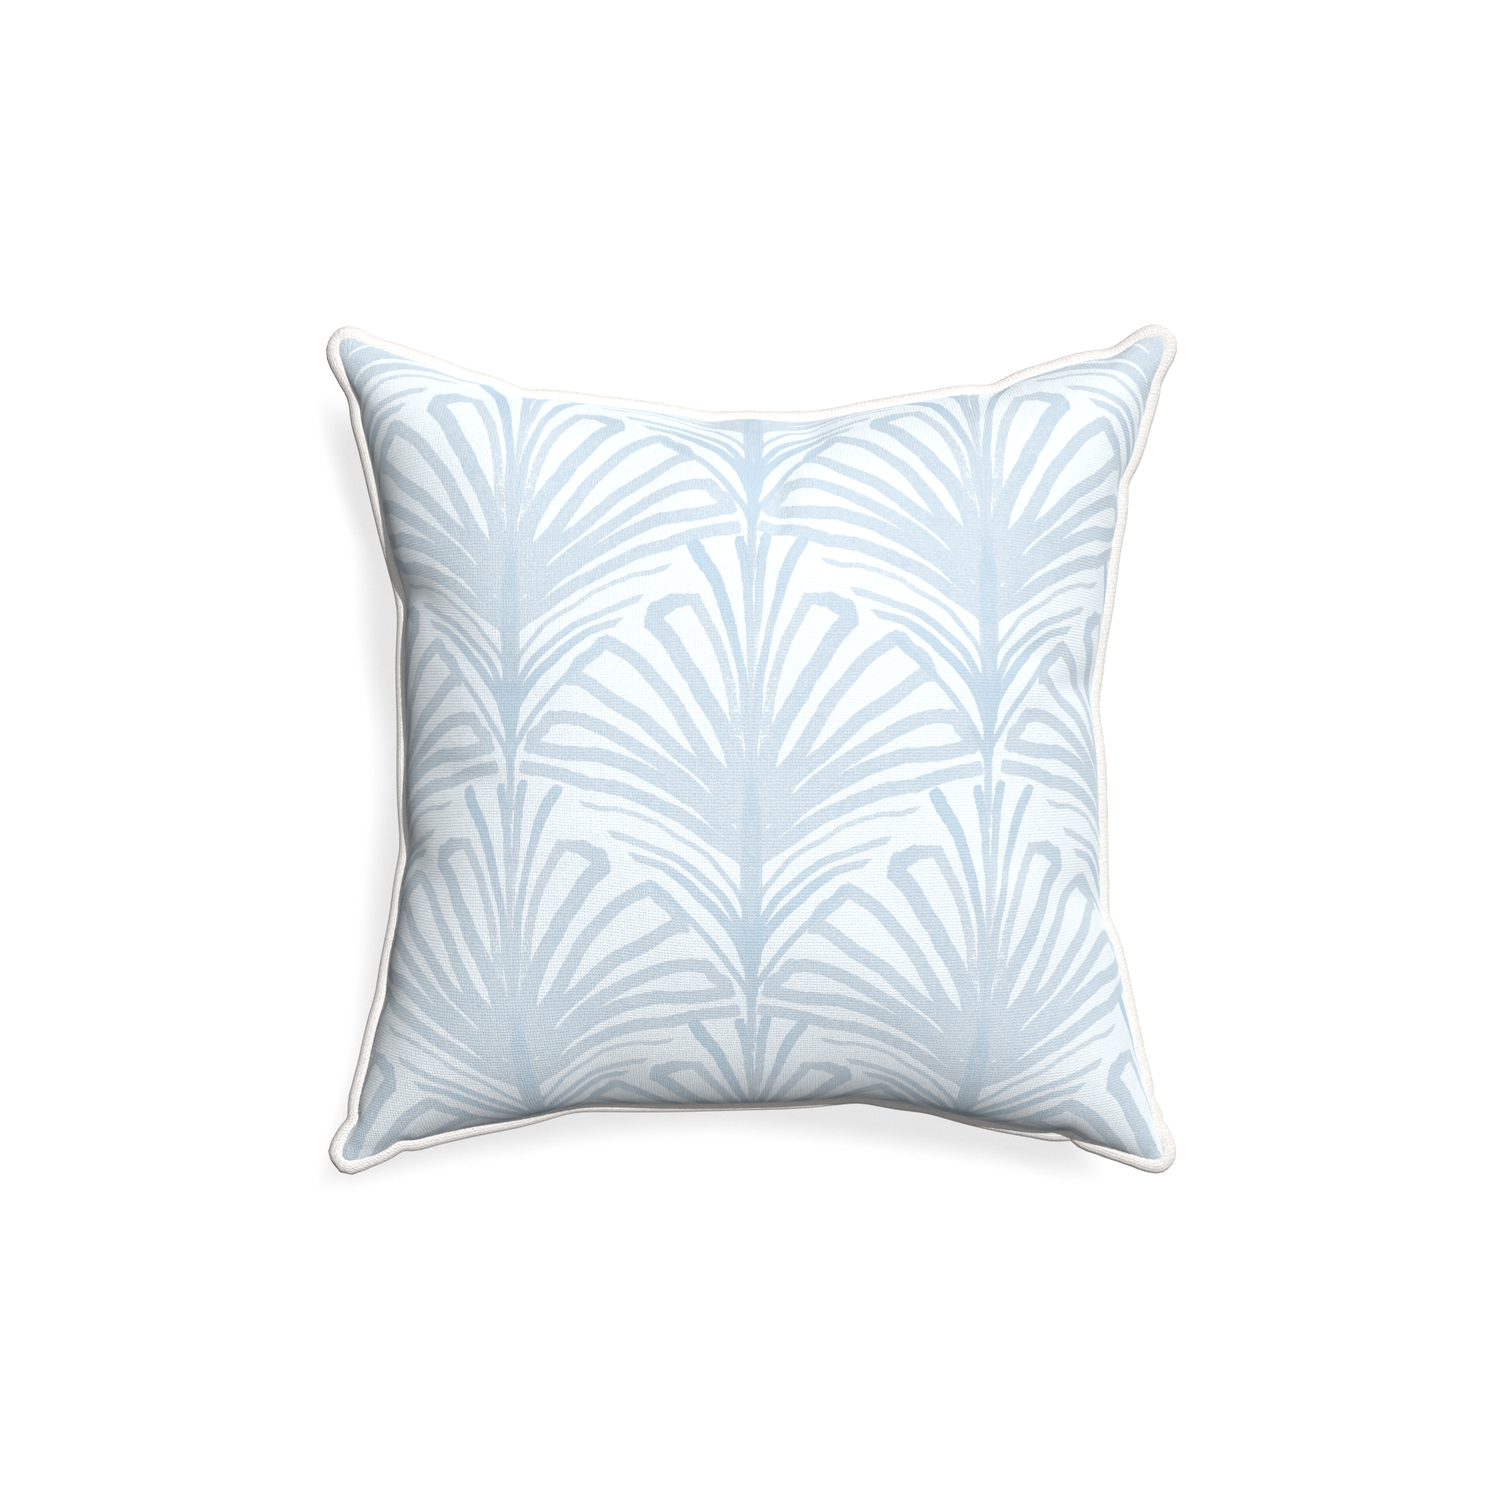 18-square suzy sky custom pillow with snow piping on white background